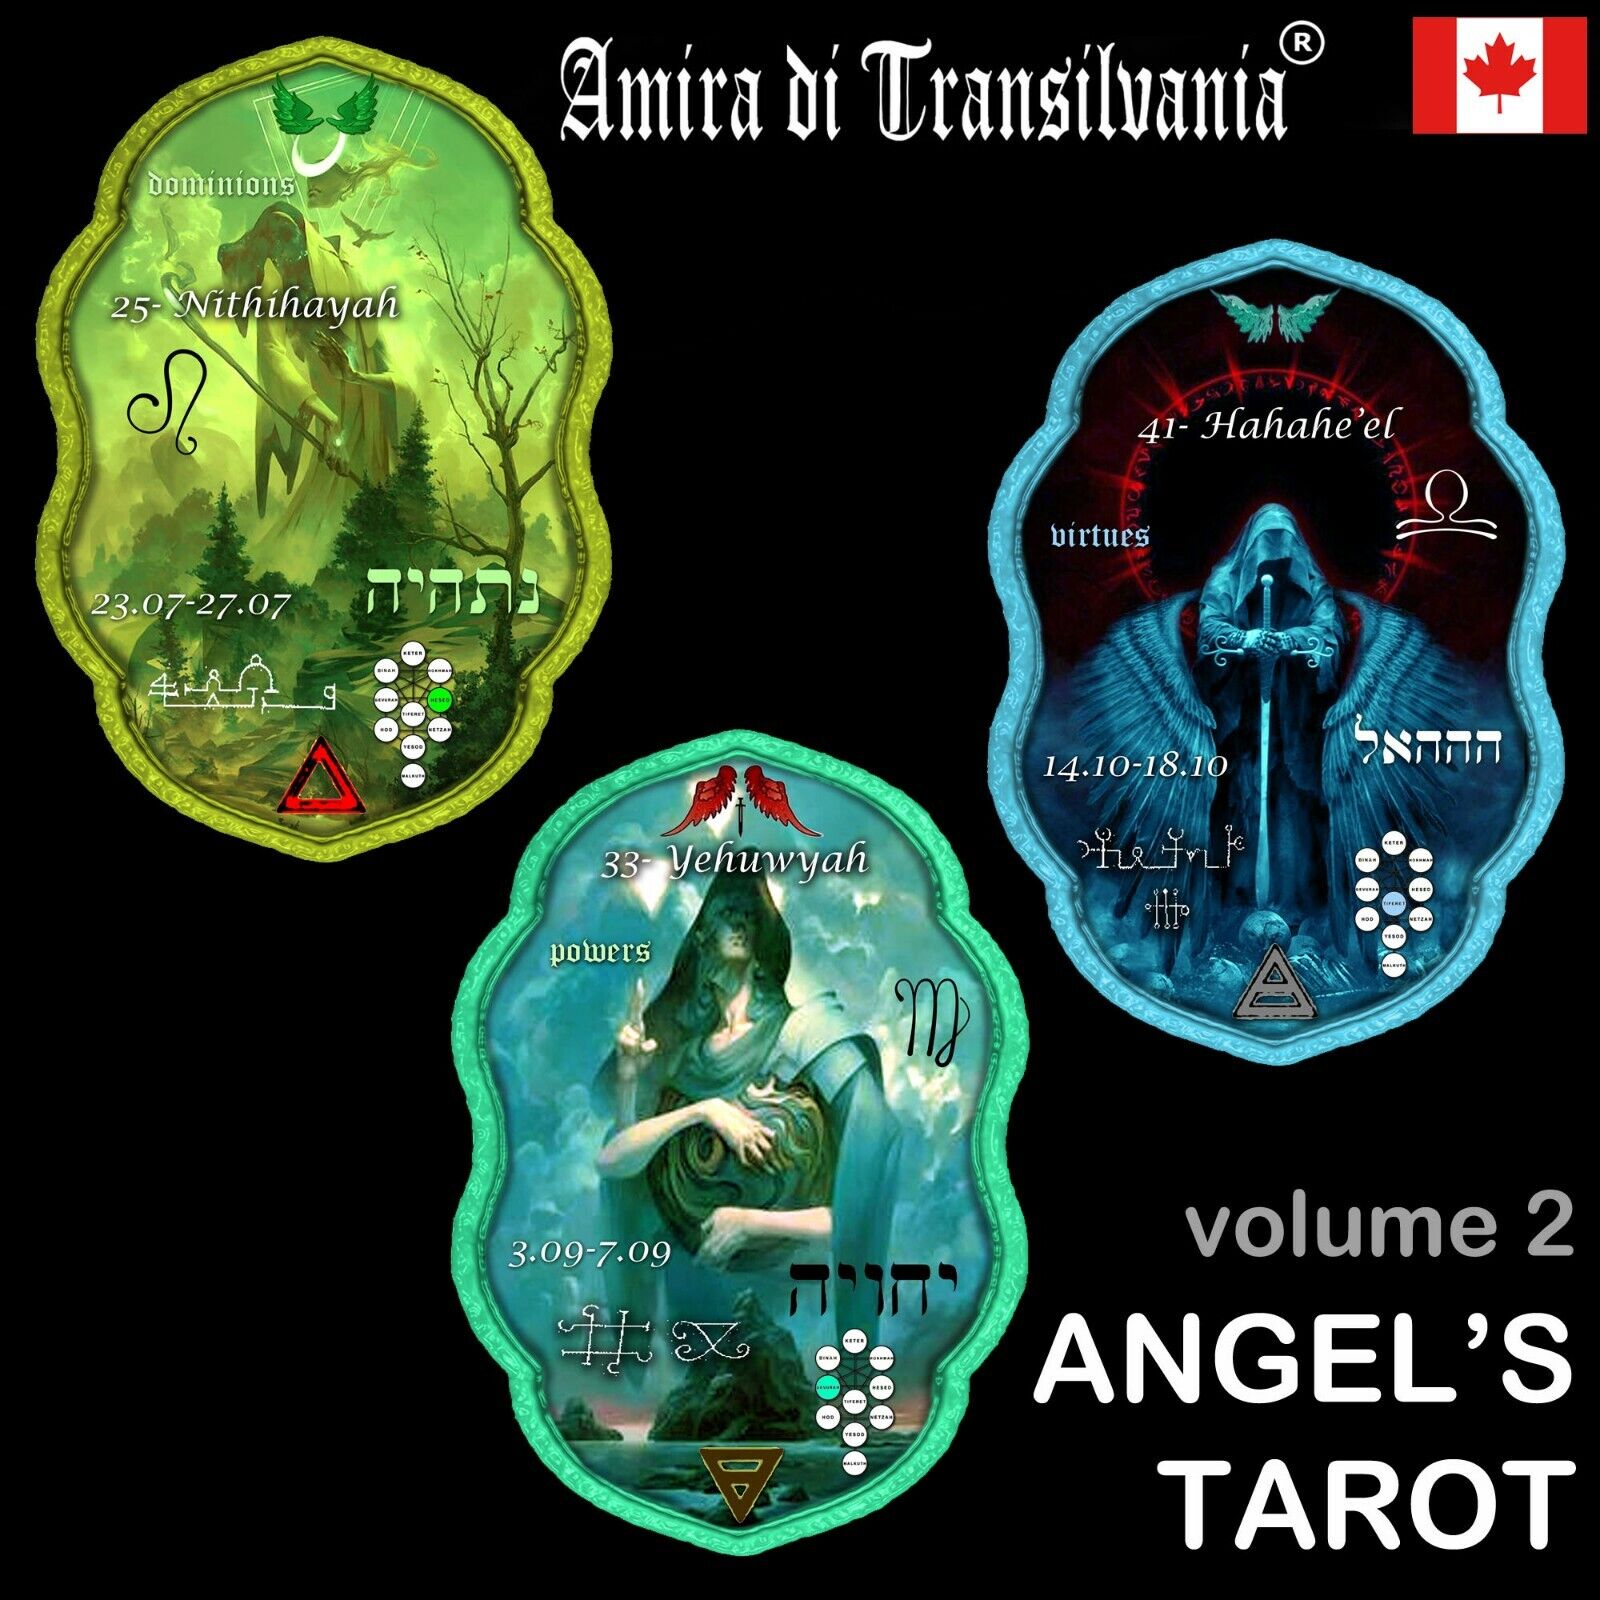 tarot of the angels oracle cards deck esoteric fortune telling divination + book